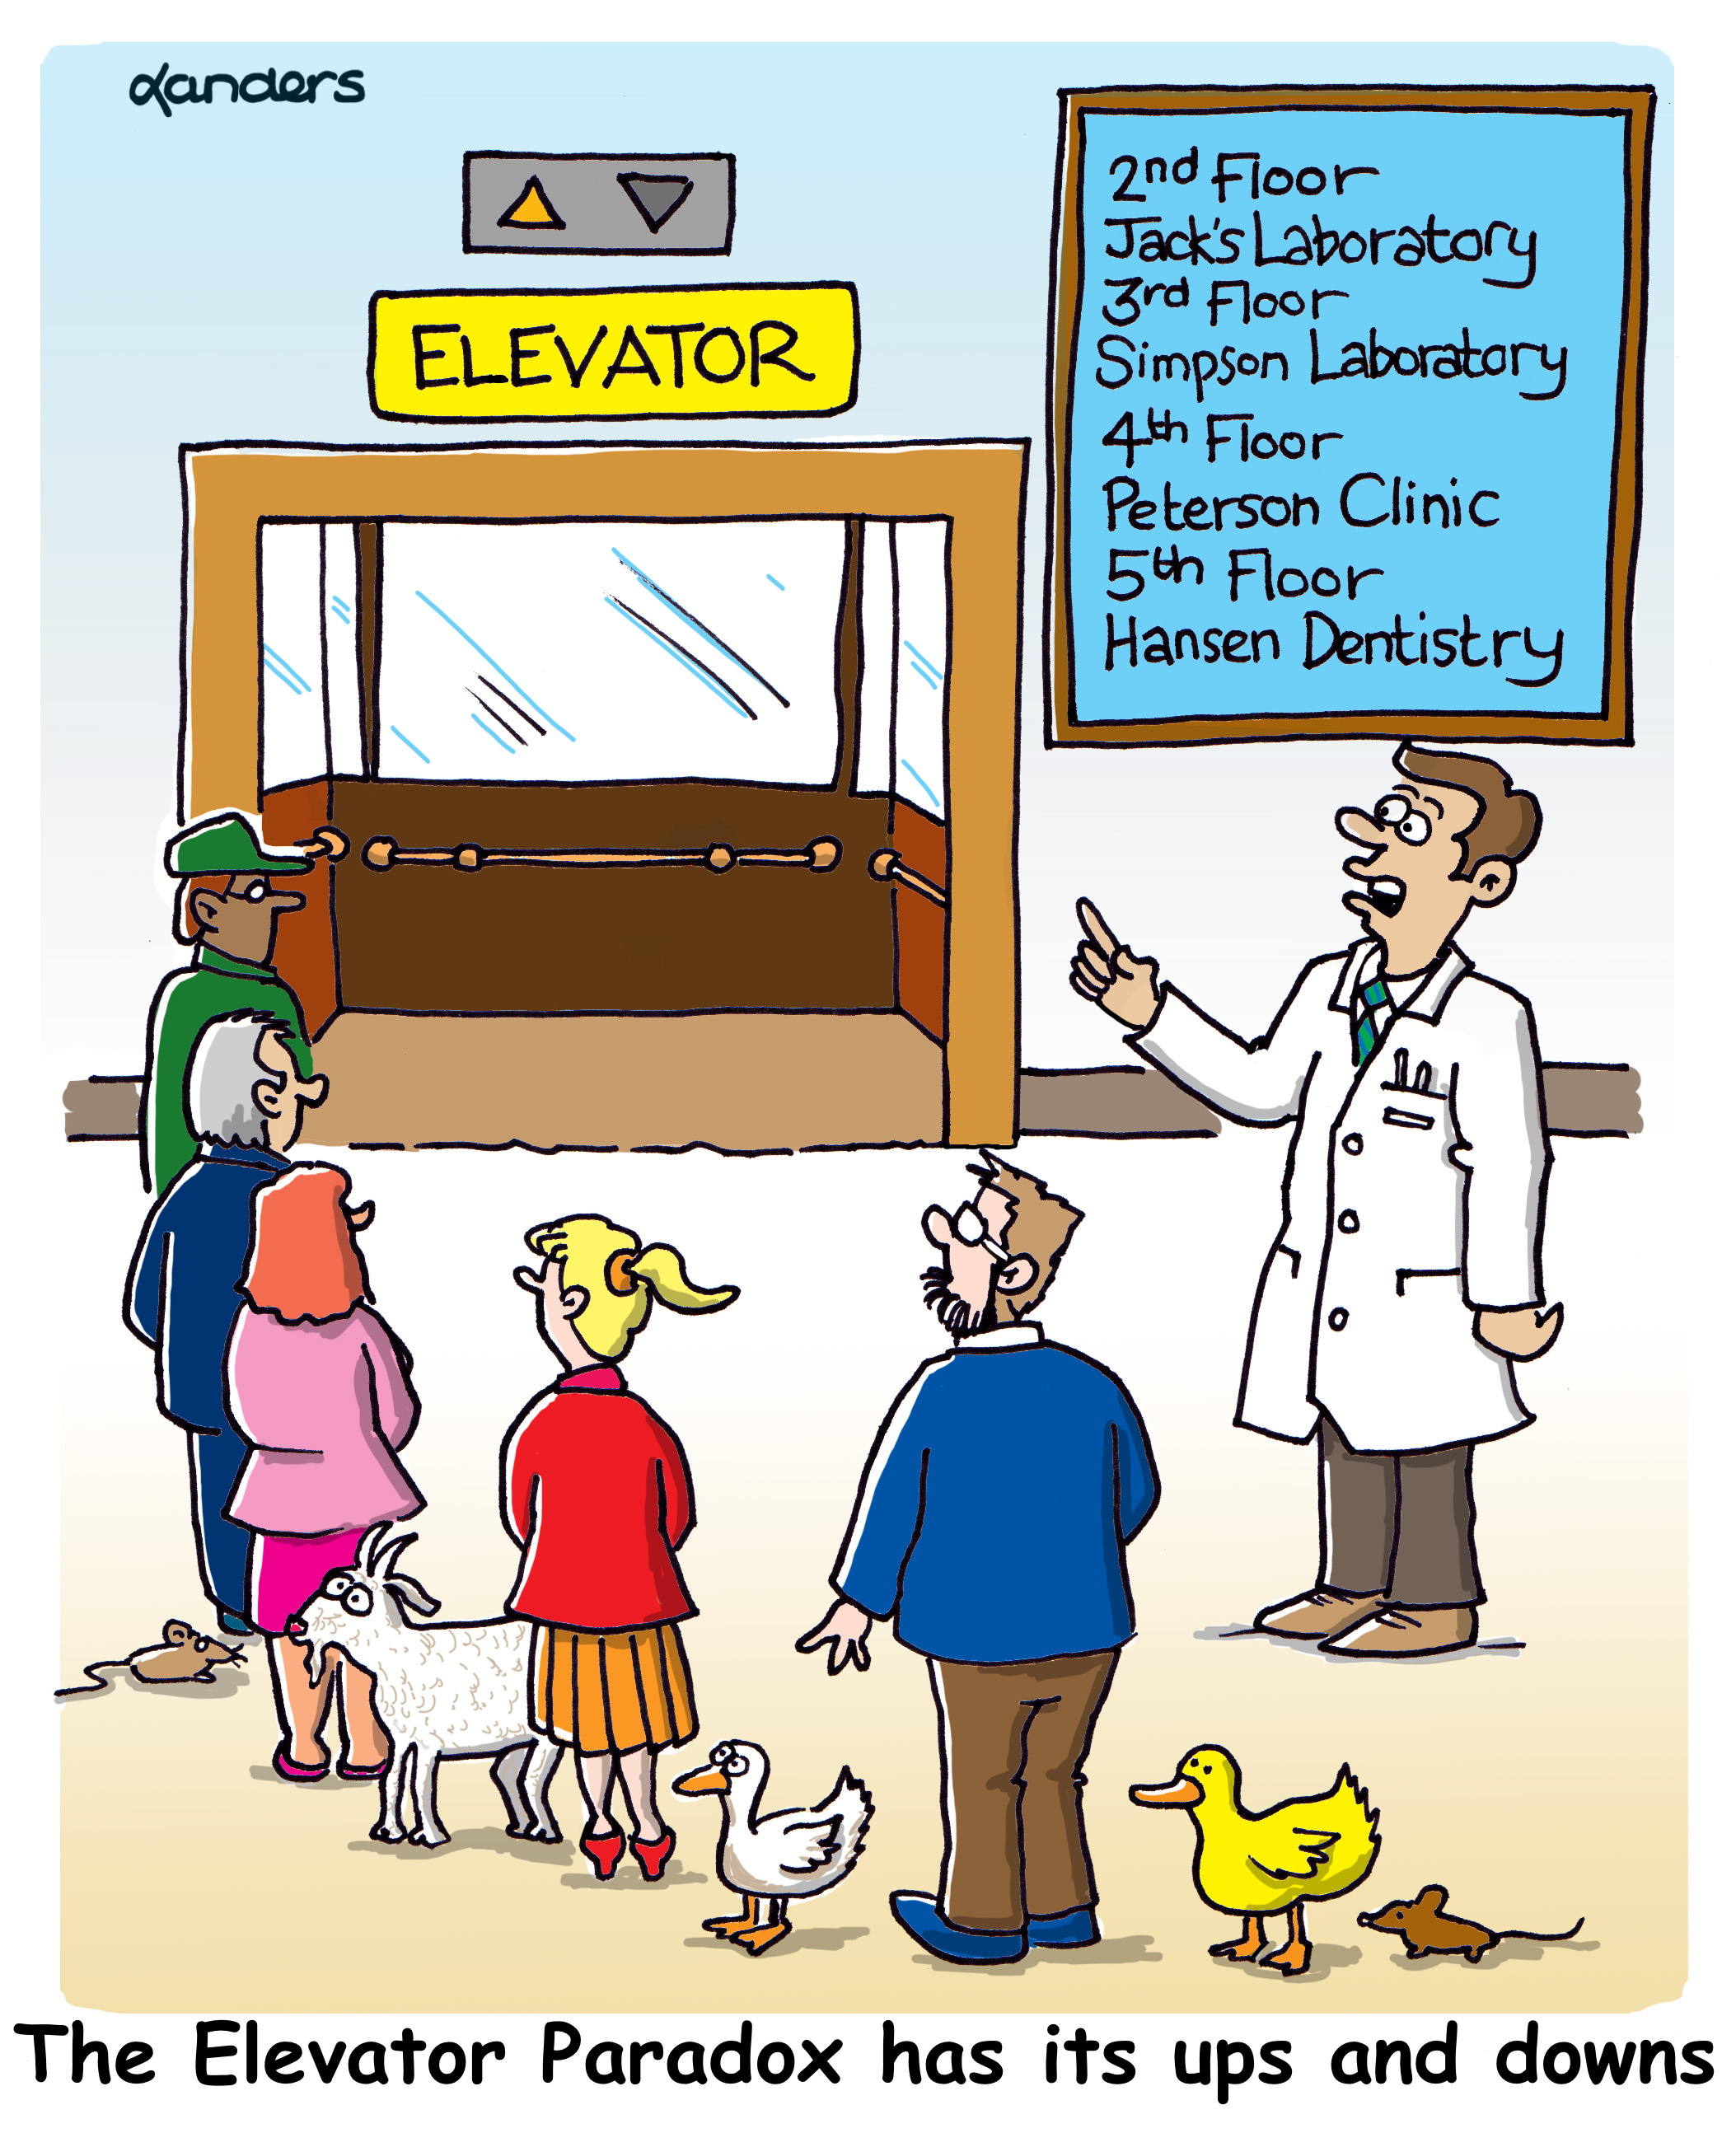 Cartoon showing people and various animals approaching an elevator